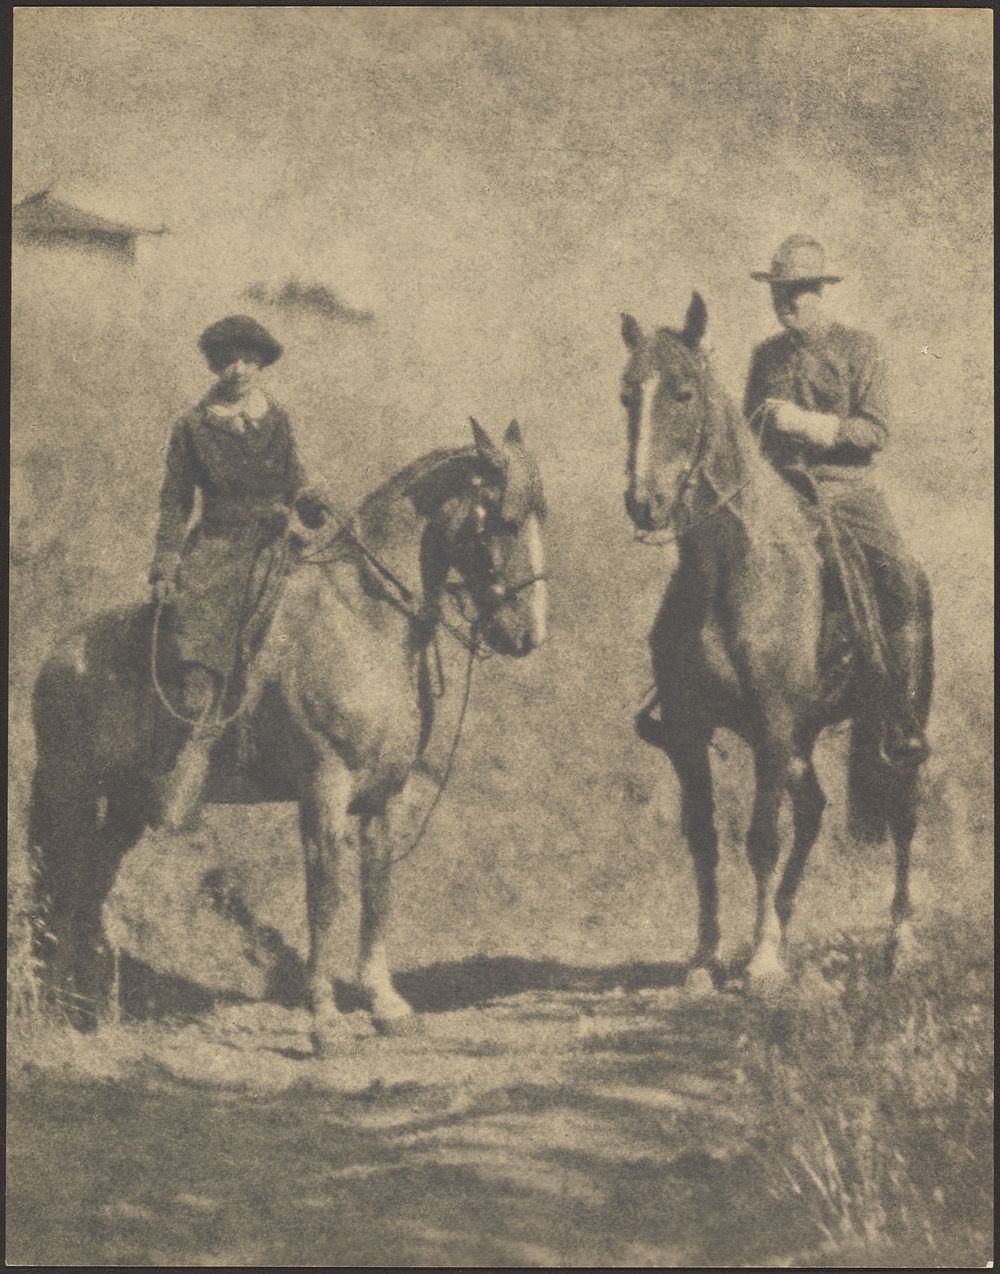 Woman and Man on Horseback by Louis Fleckenstein